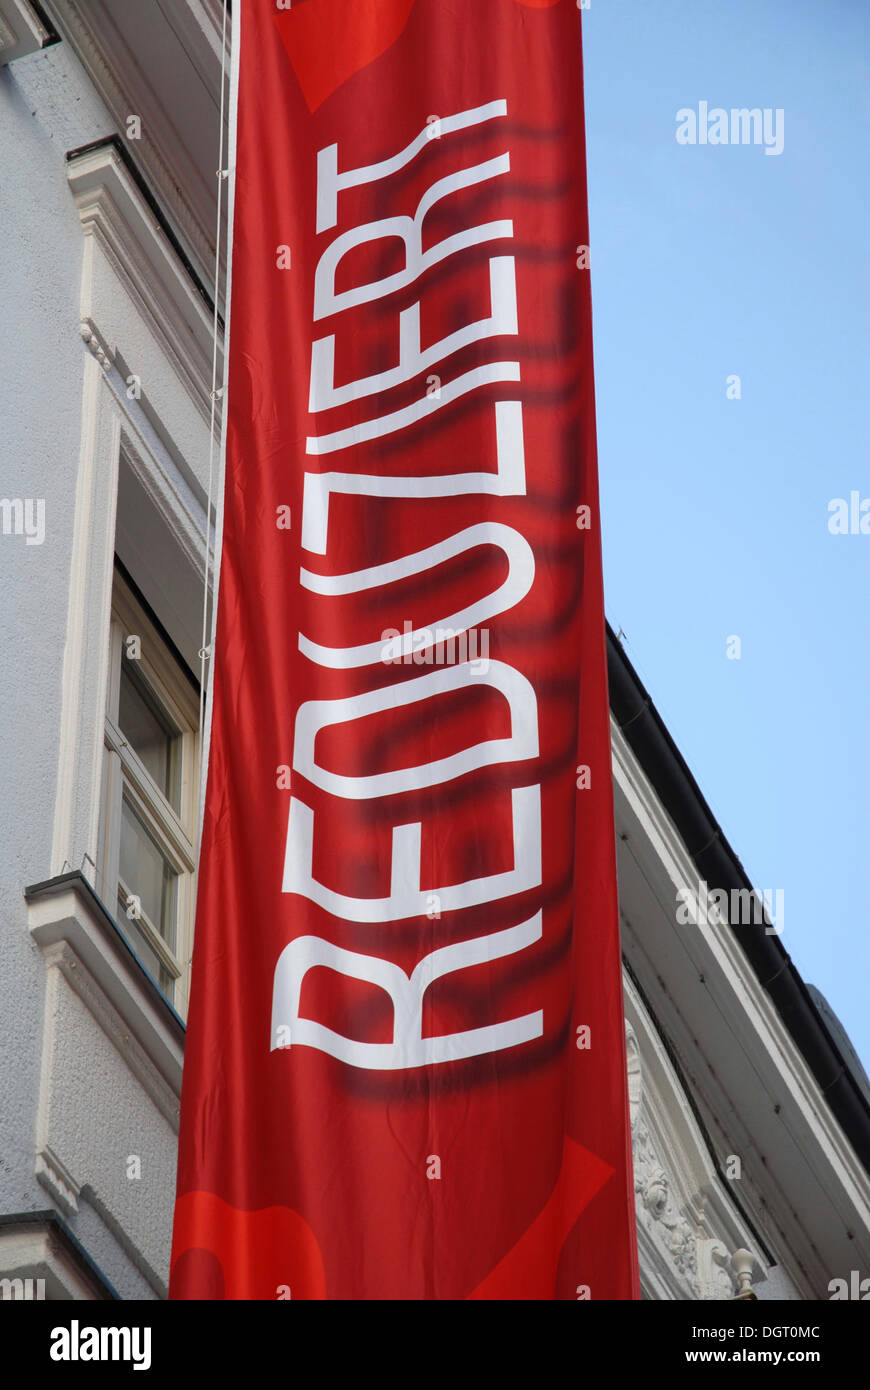 Banner labelled Reduziert, German for Reduced, Sale Stock Photo